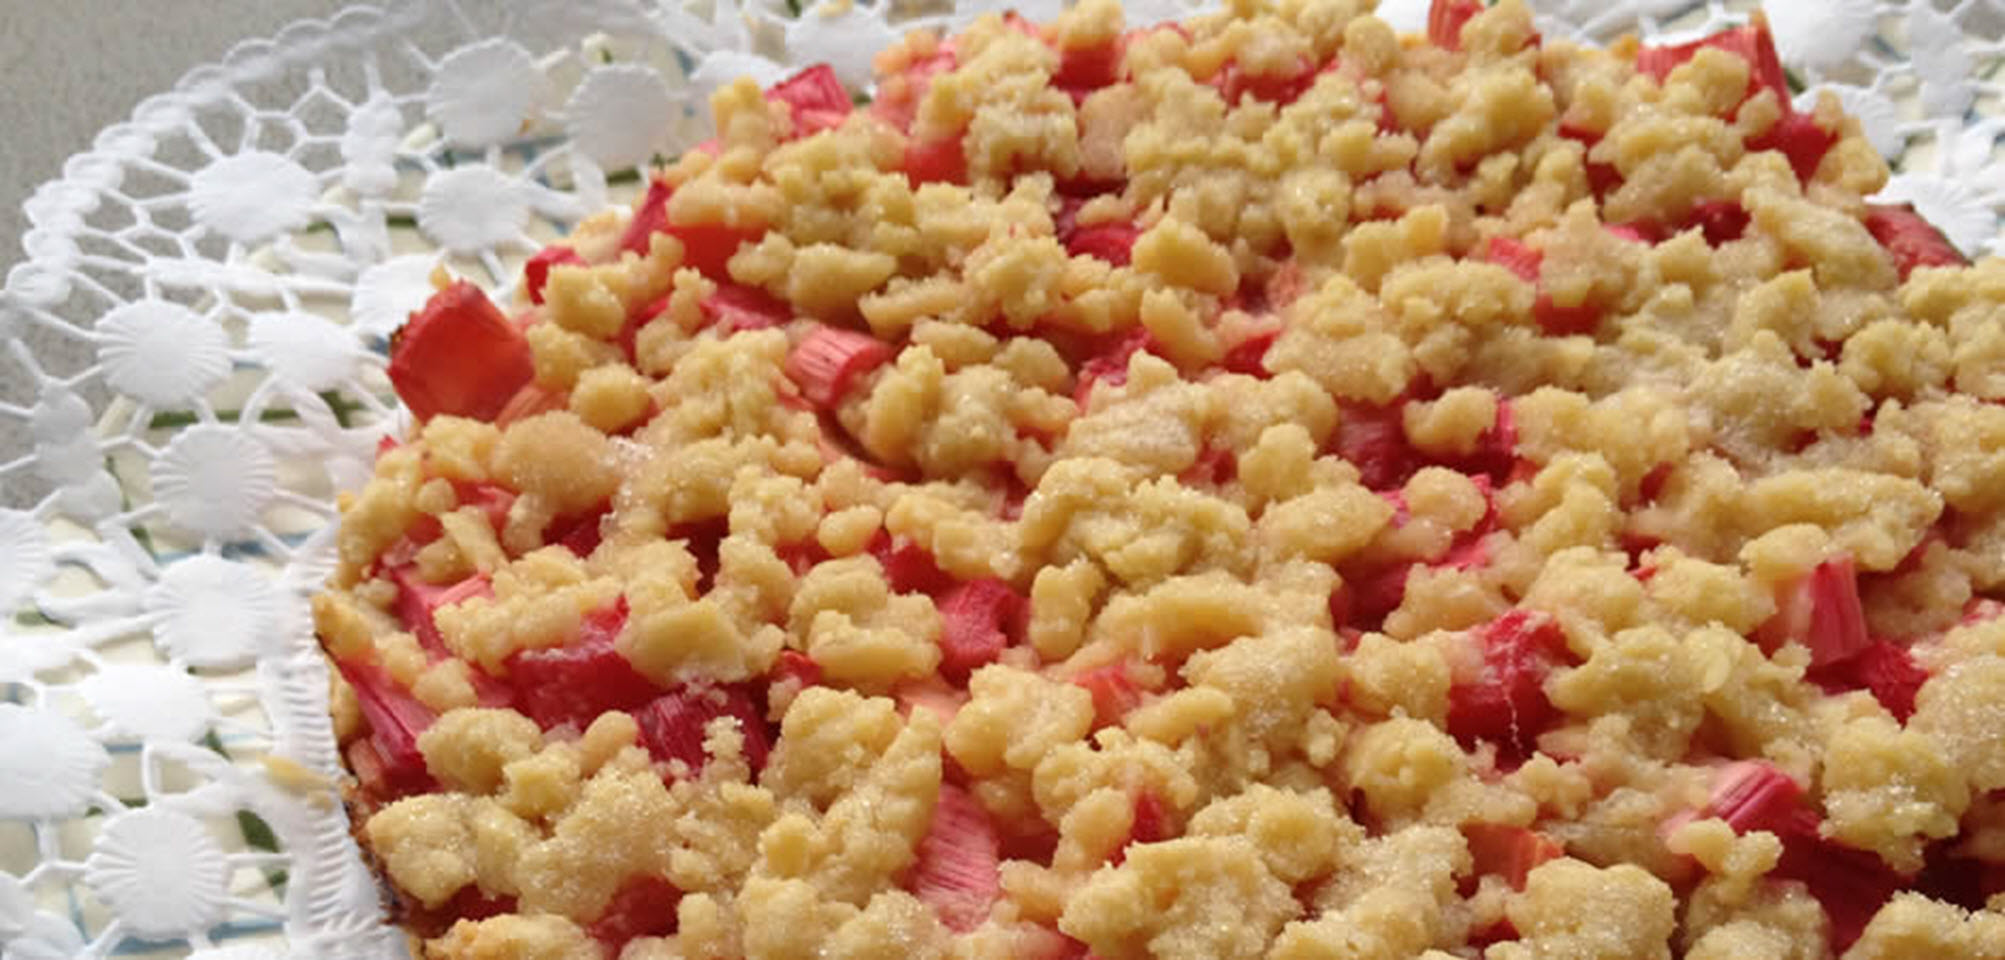 Germans really love their streusel &mdash; and by streusel we don't mean itsy bitsy crumbles but large, chunky, crunchy streusel! There is virtually no German cake with fruit of which there isn't a variation with streusel topping. Rhubarb streusel cake is especially popular because rhubarb on its own is very tart and it's only the sweet streusel that makes it the treat that it is. Interestingly, it was only after the price of sugar dropped and was no longer a luxury that rhubarb gained popularity in Germany and found its way into streusel and cakes alike.
                          